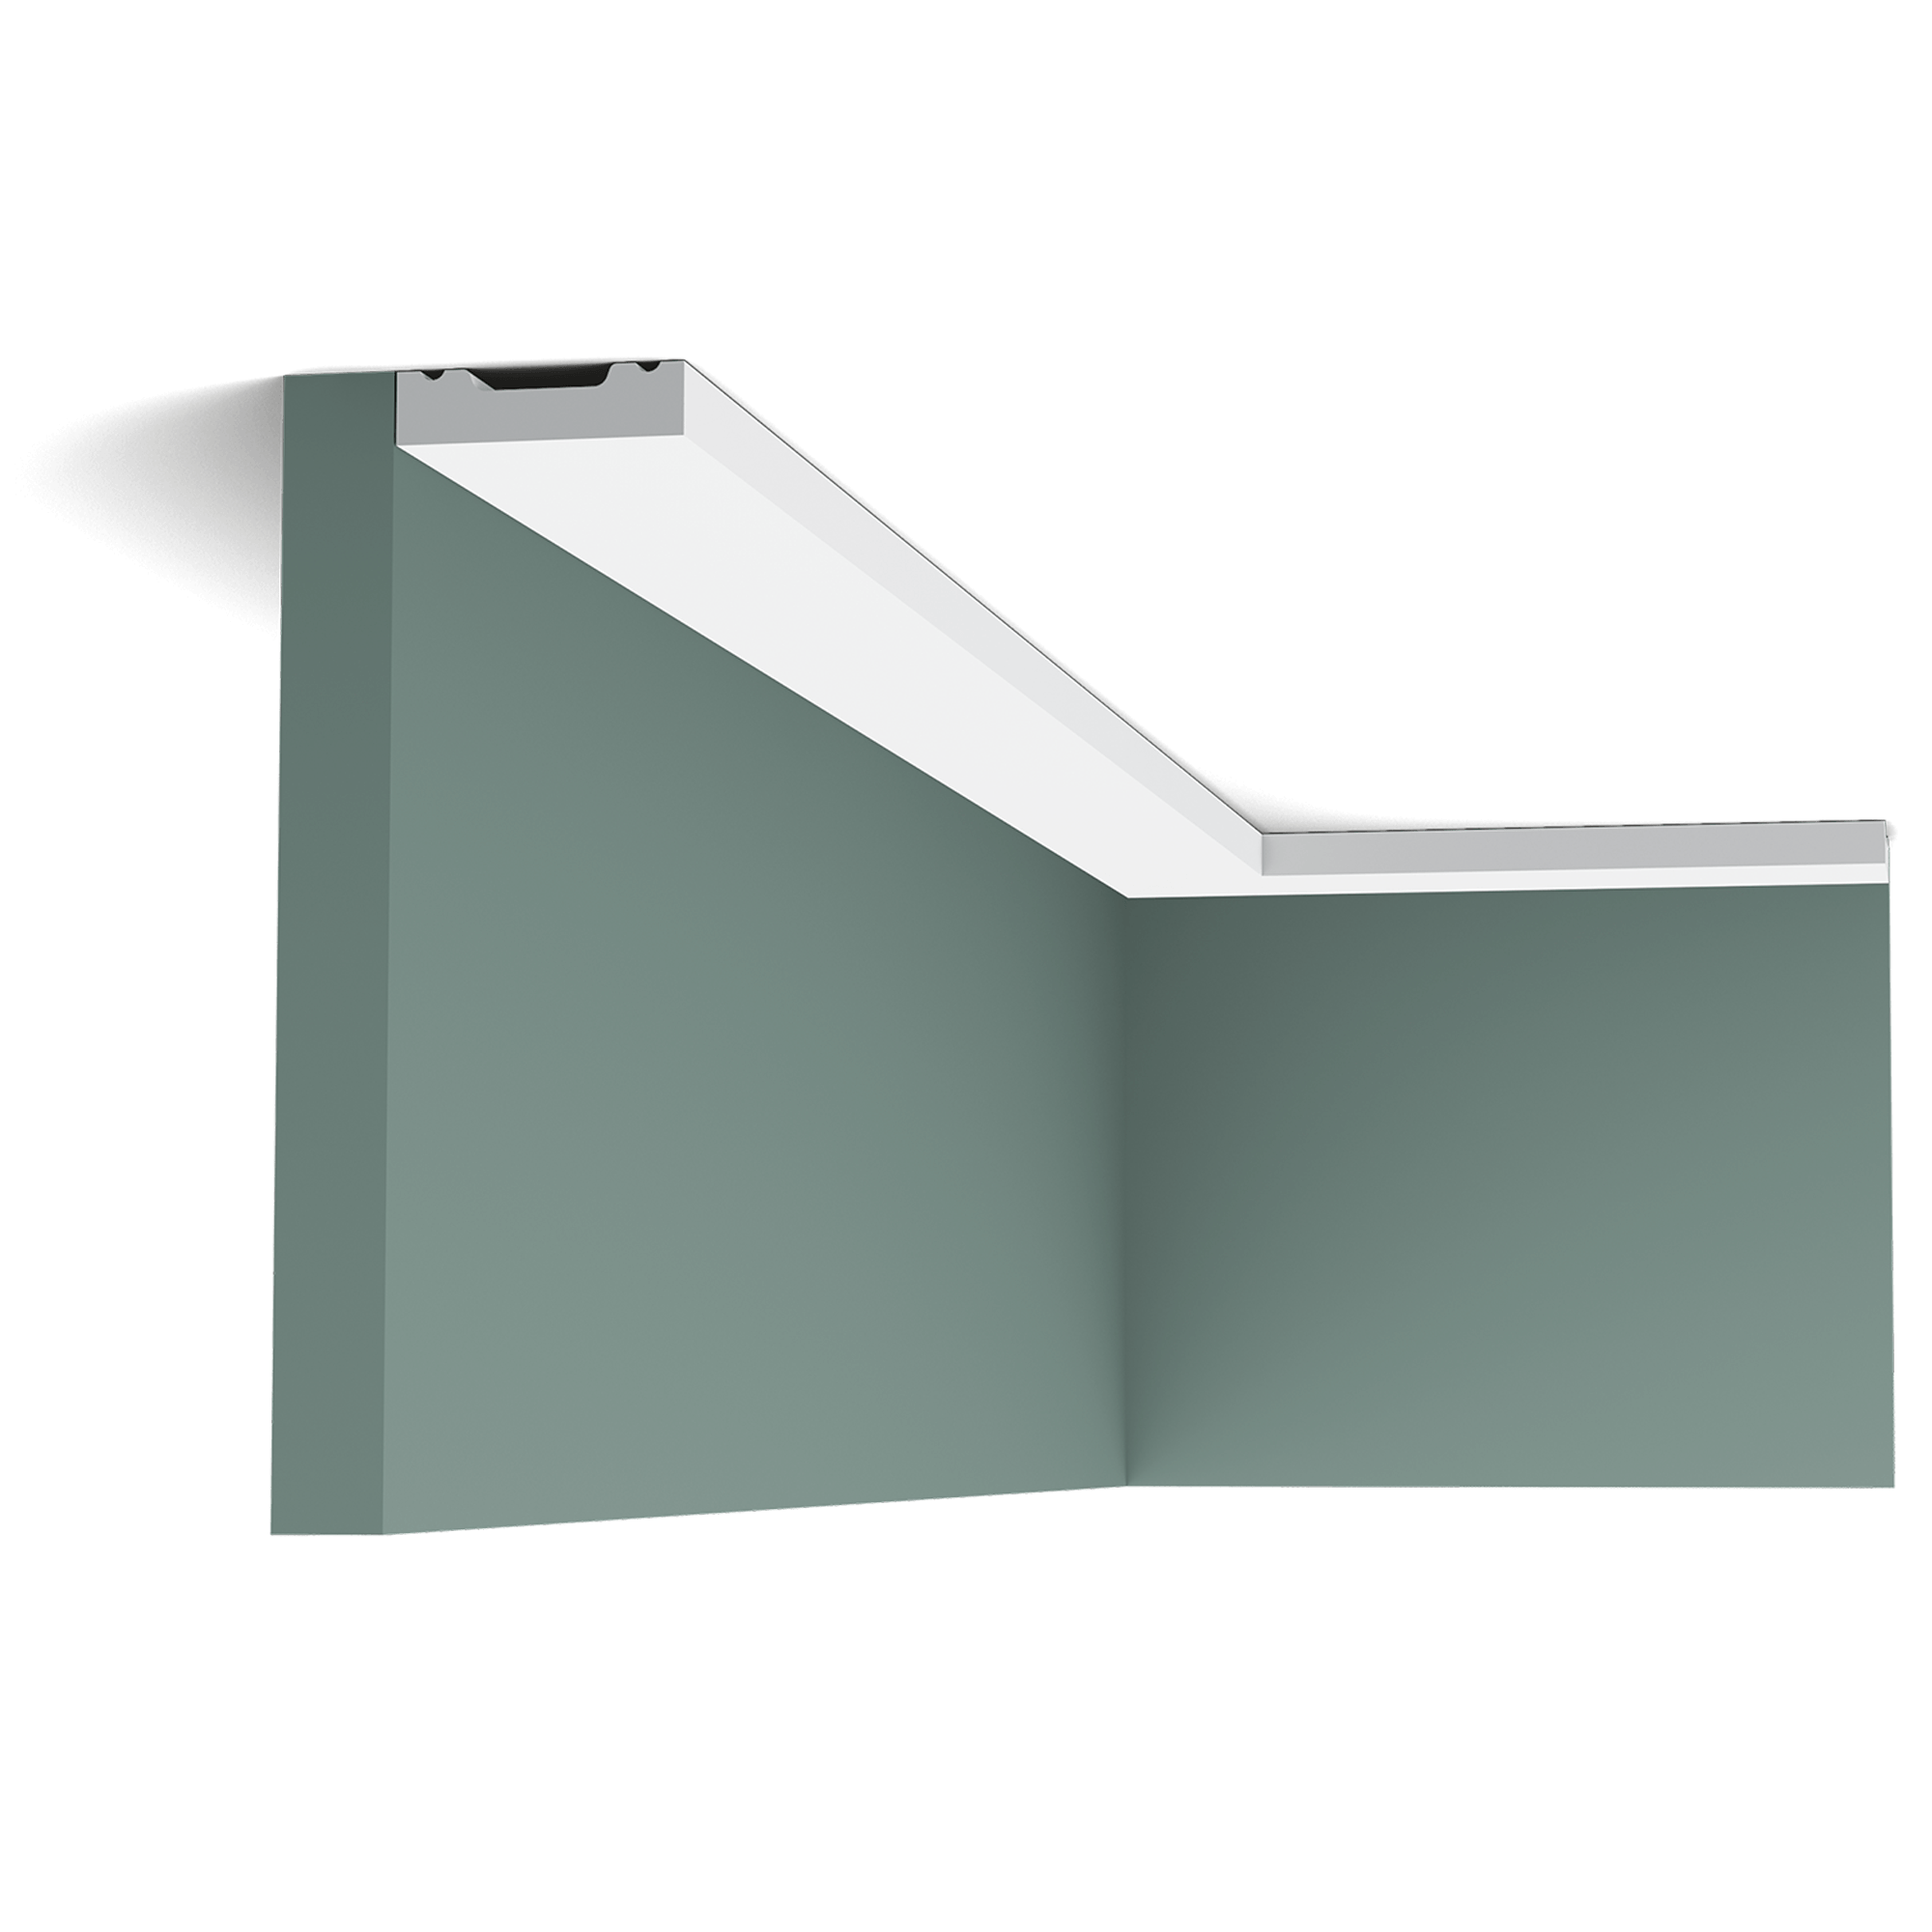 Our simplest cornice moulding is part of the SQUARE family. Use this multifunctional profile to fit your entire home with the same cornice moulding. All you need to do is select the correct size to fit your space.